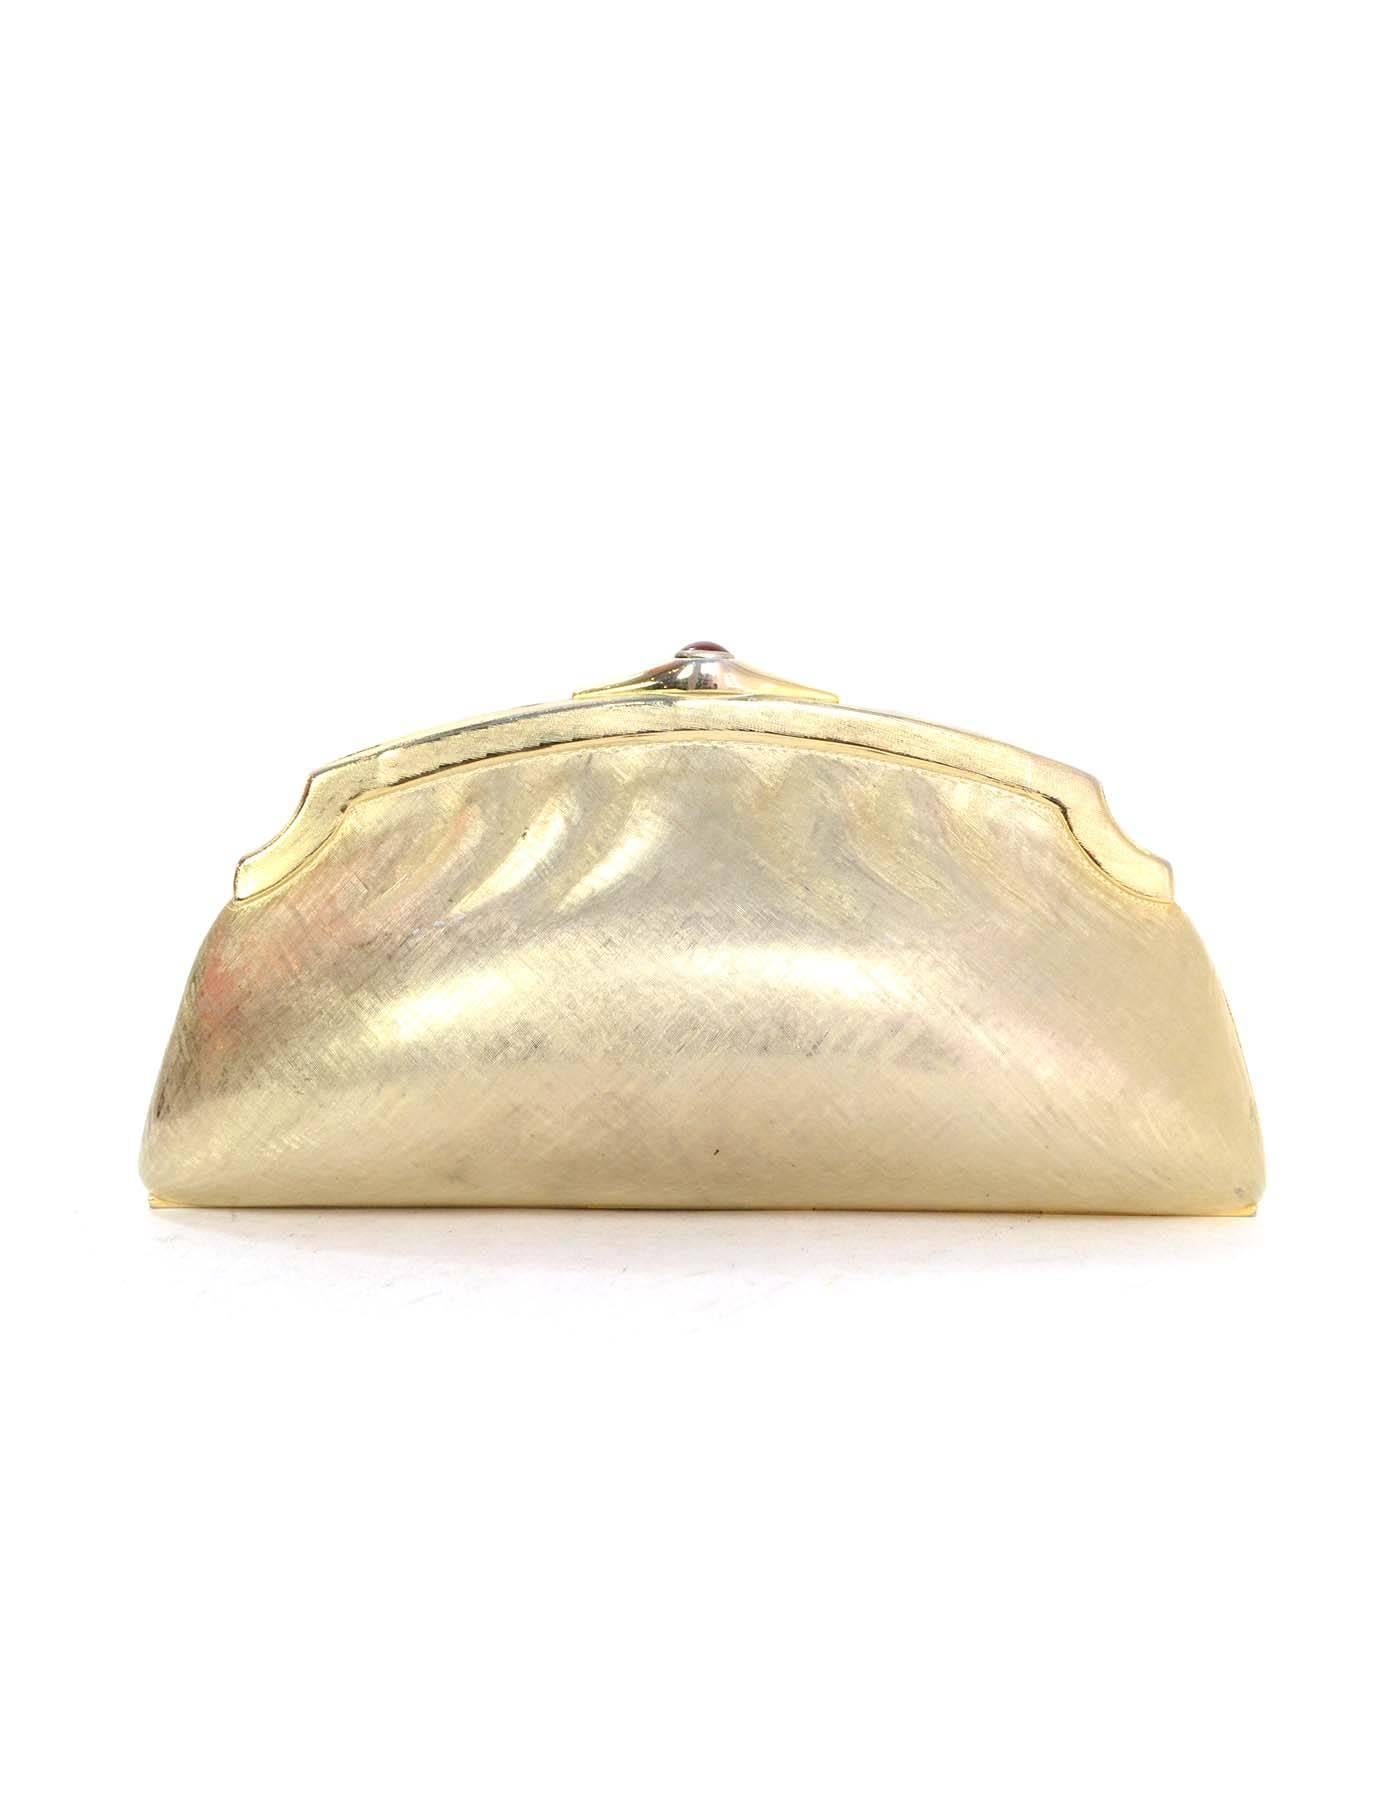 Judith Leiber Textured Gold Clutch Bag GHW In Good Condition In New York, NY